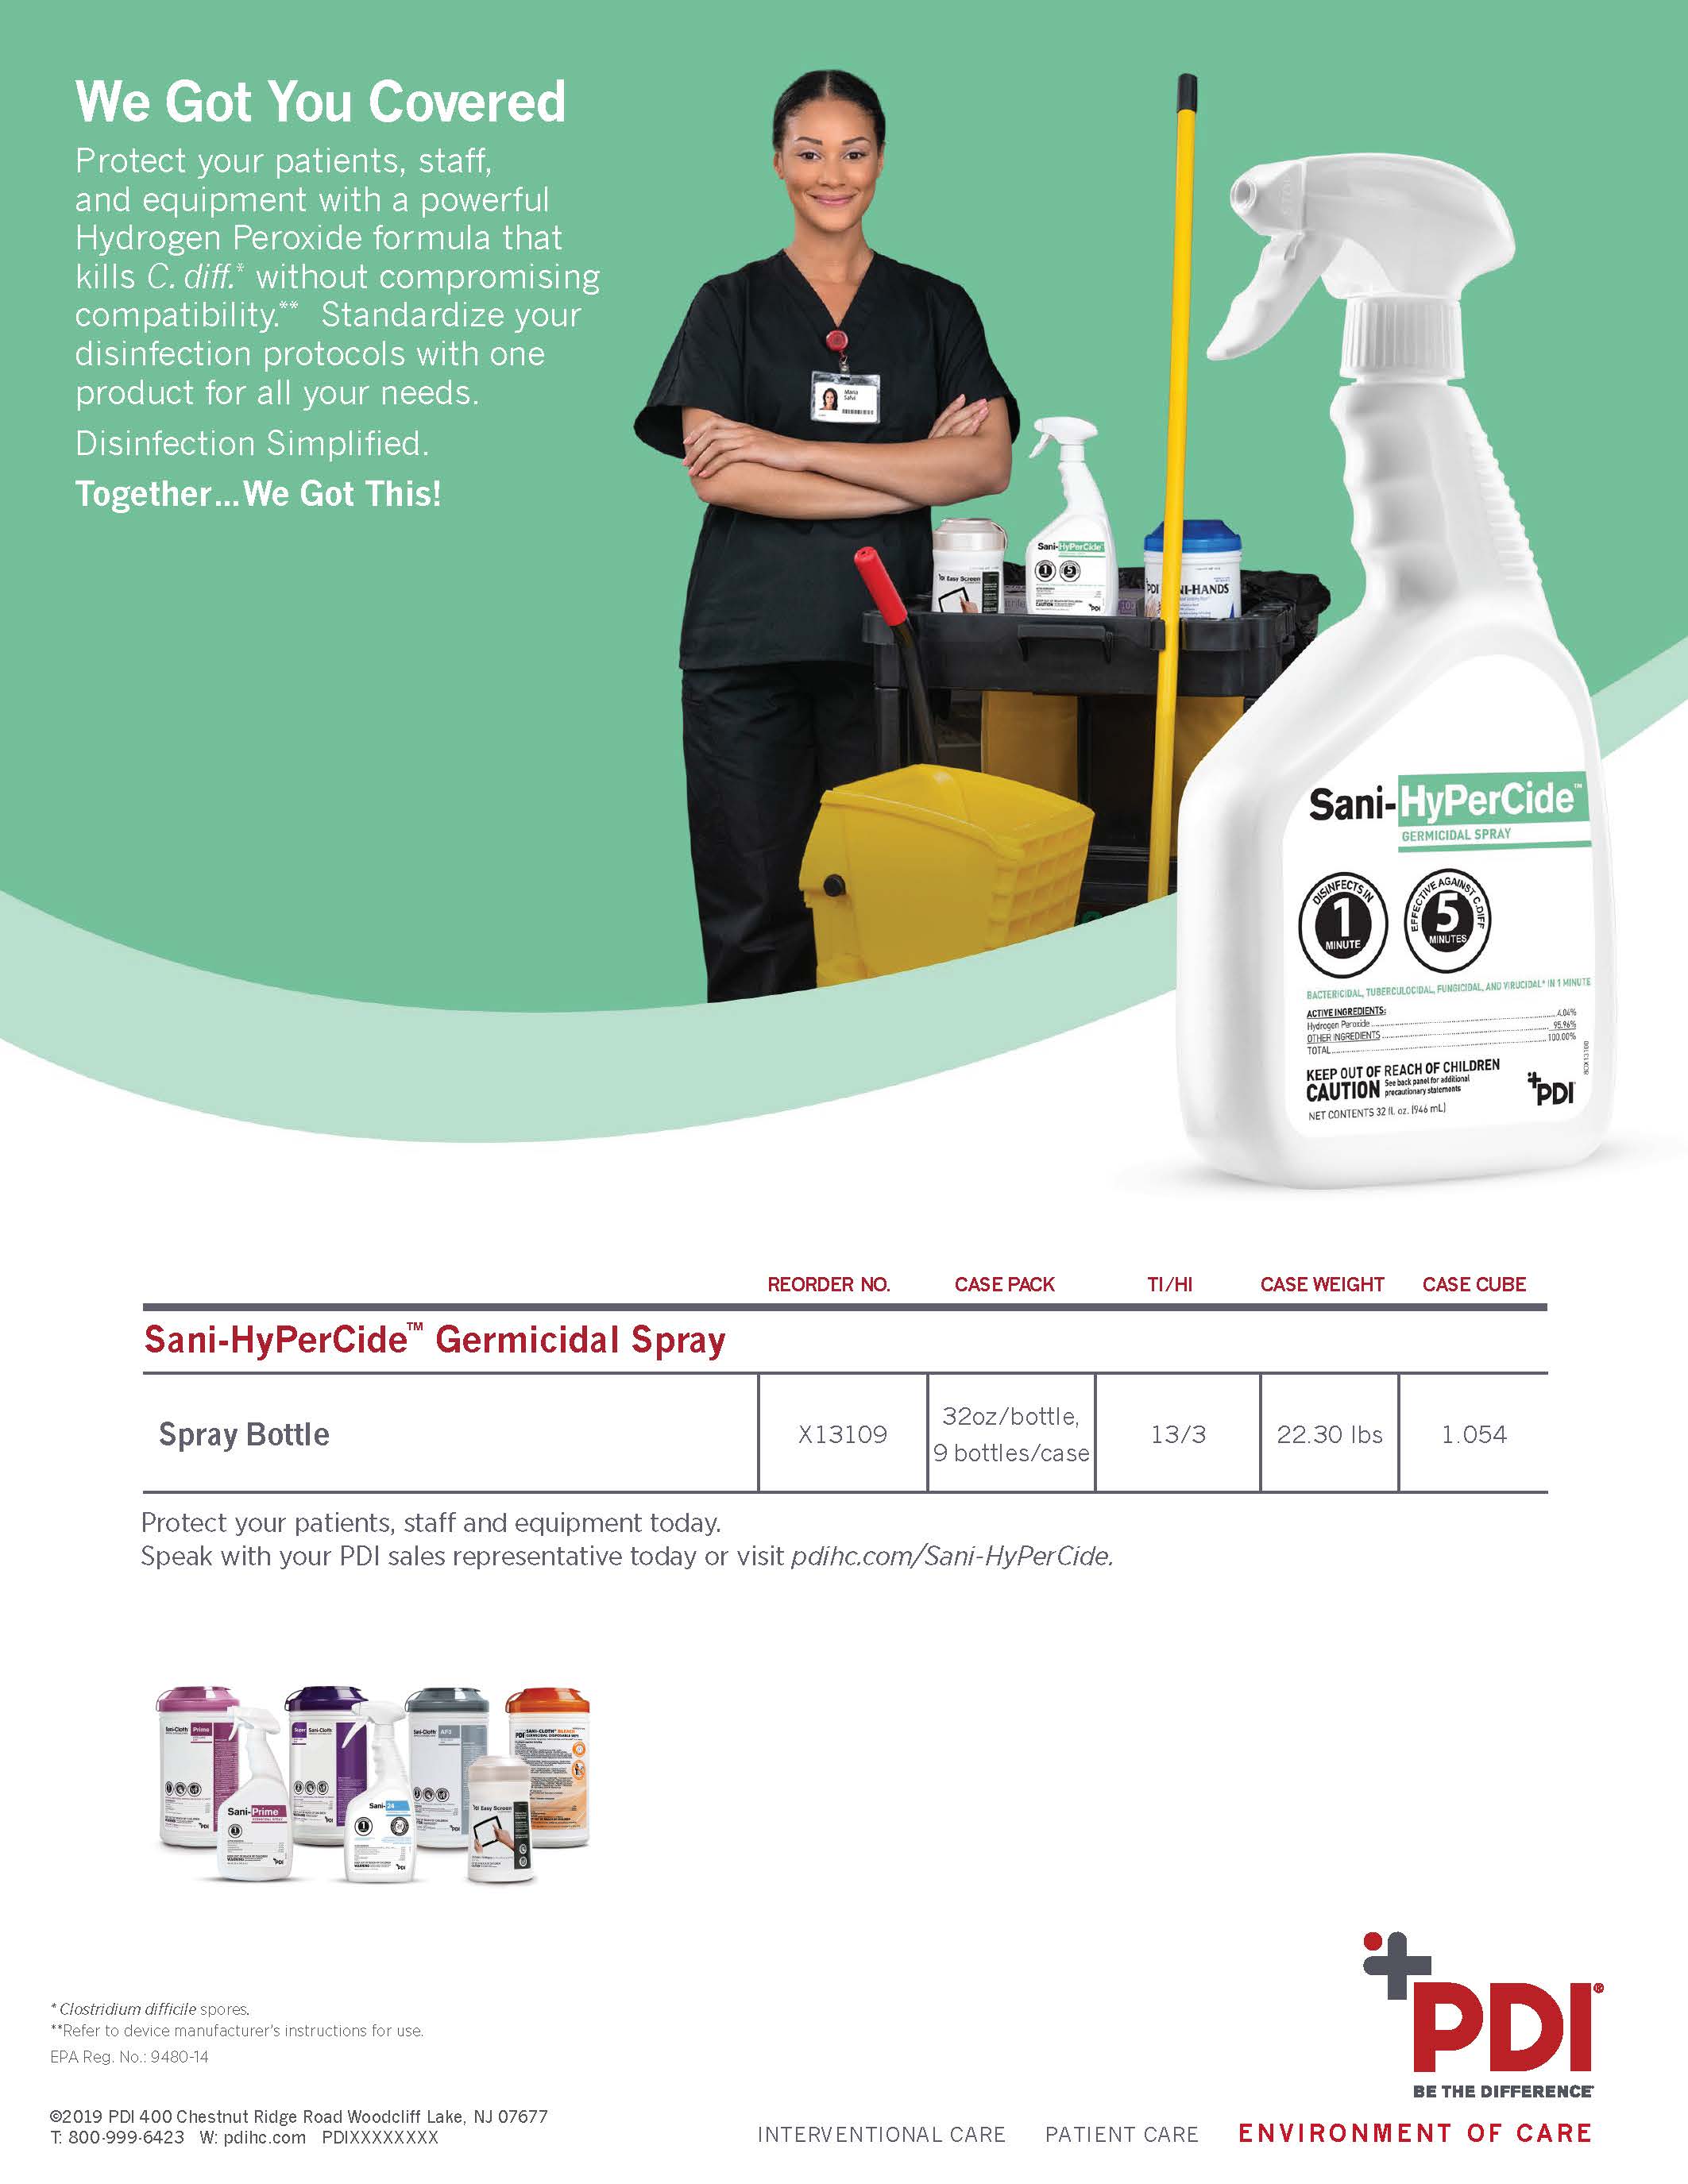 NYC + Chicago Healthcare and Medical Photographer - Pdi Healthcare Sani-HyPerCide  Brochure